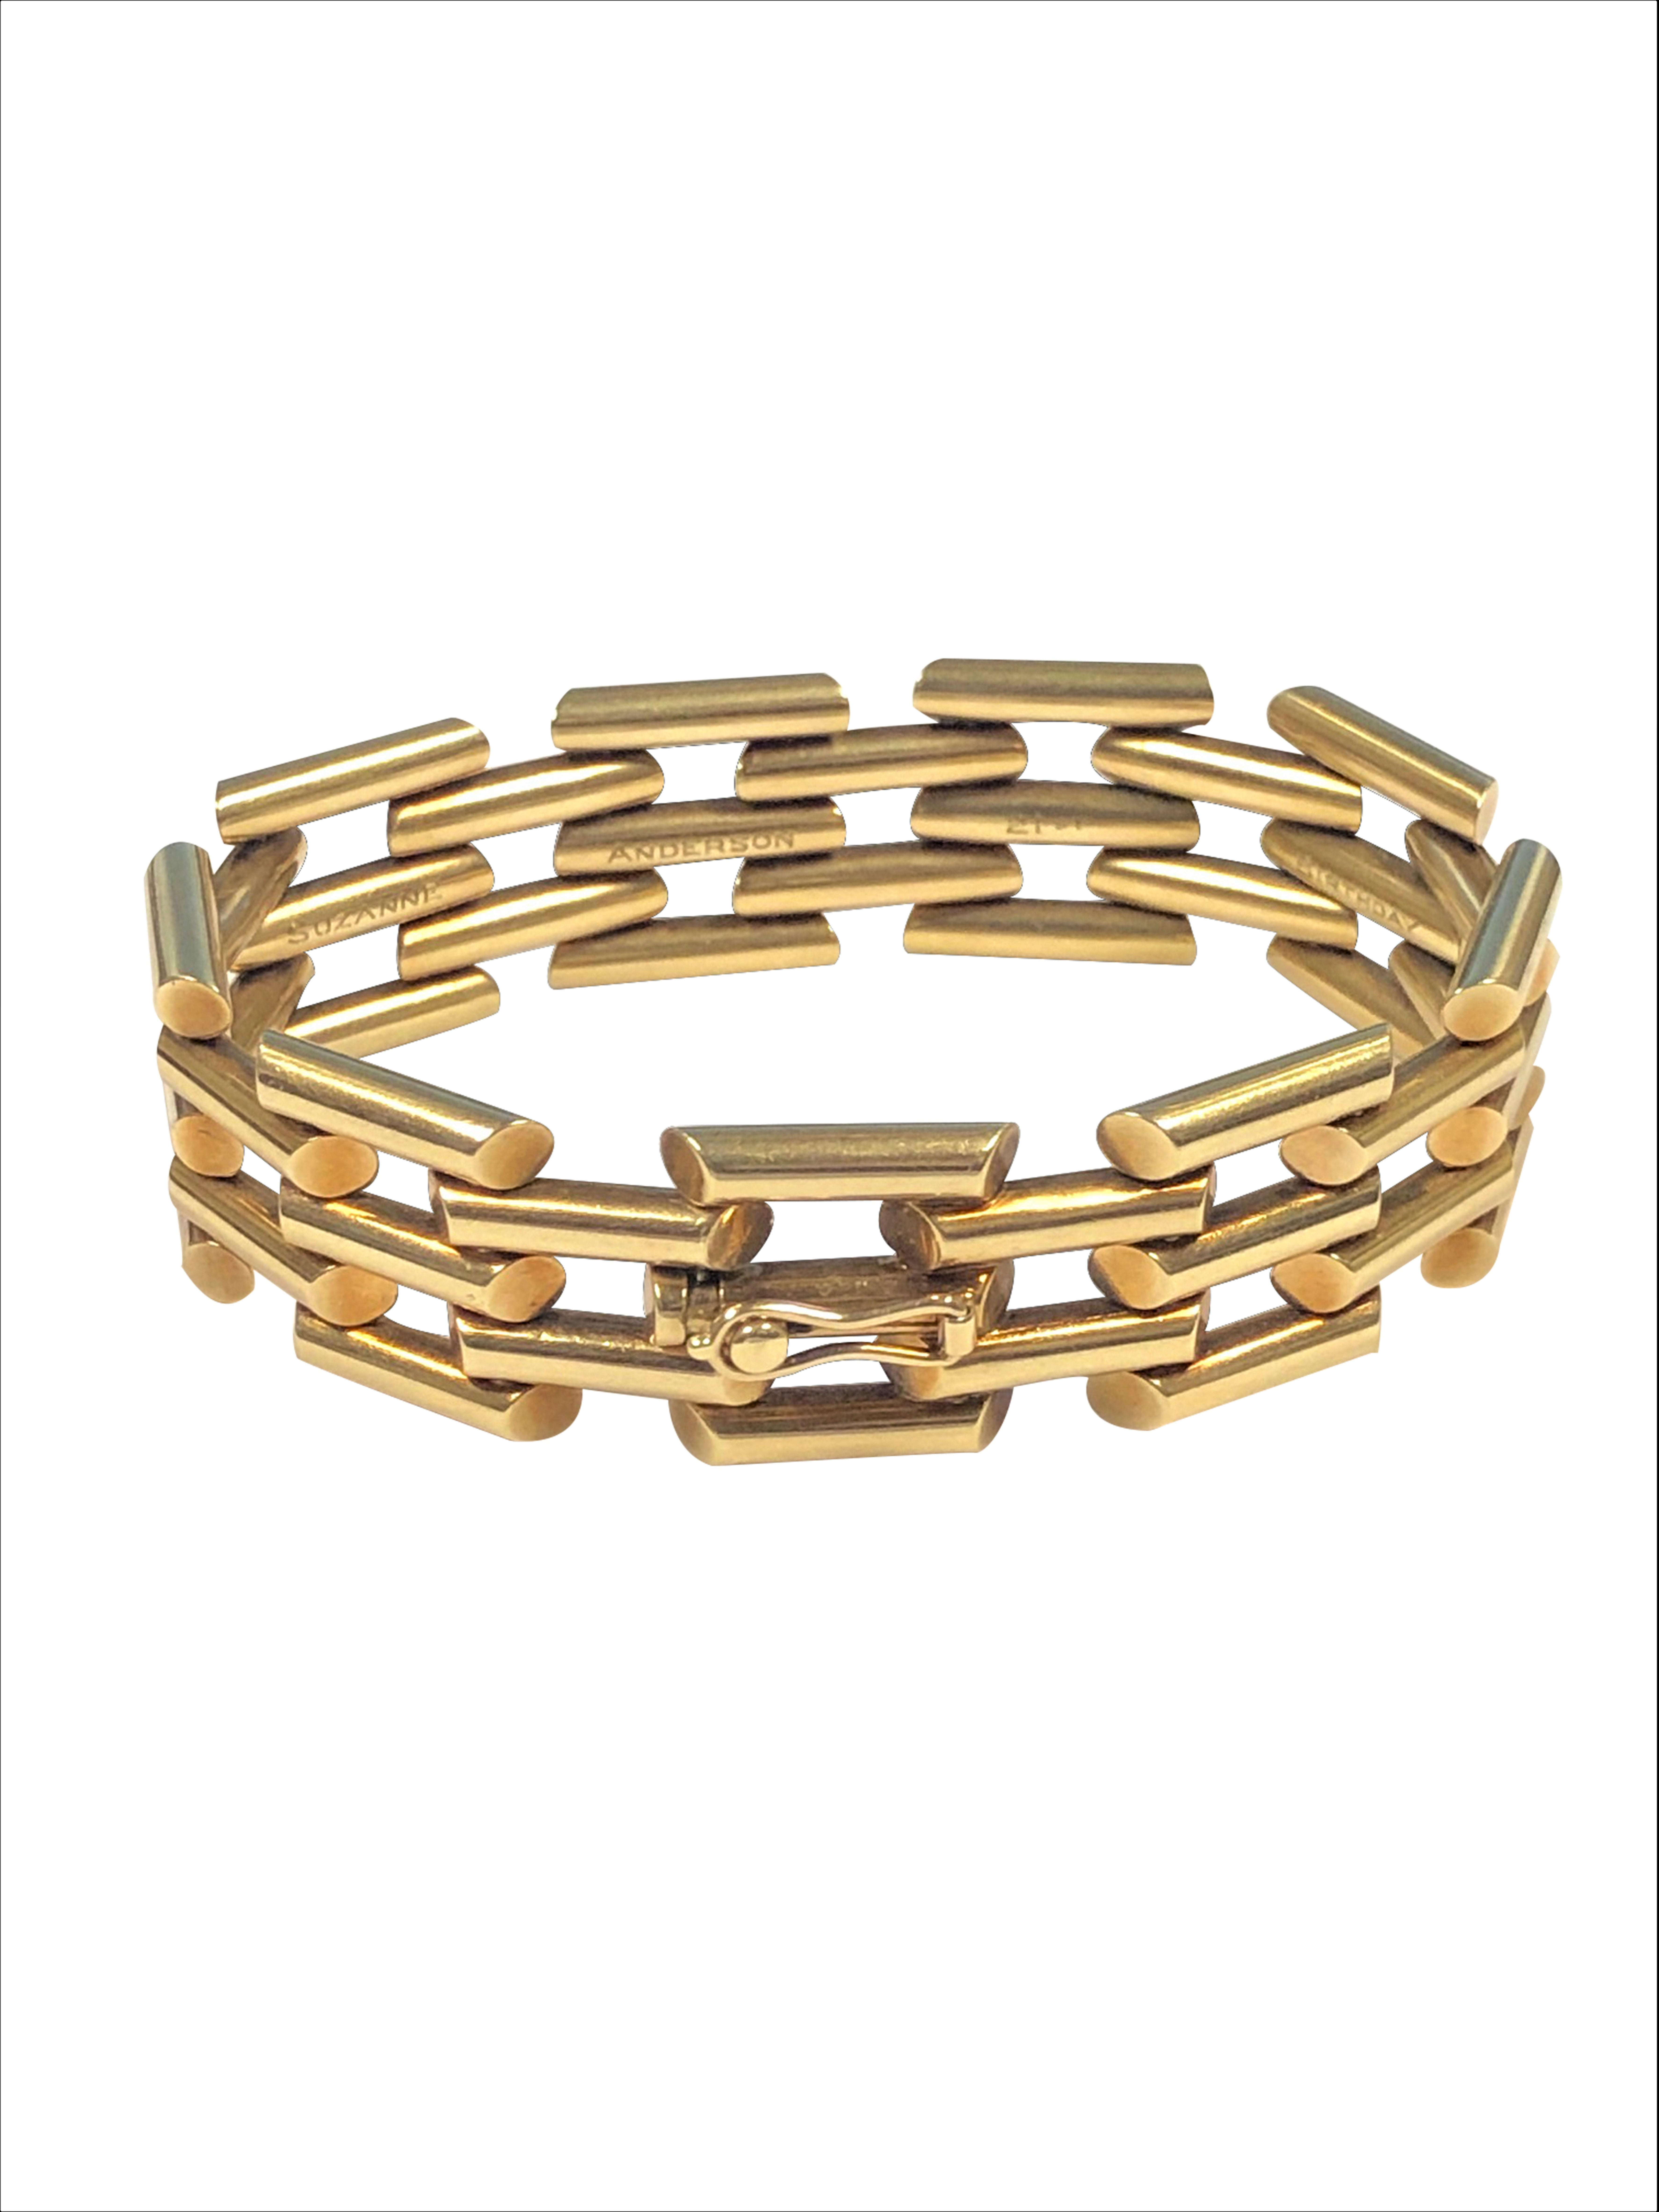 Circa 1940s Cartier 14K Yellow Gold Bracelet, measuring 7 1/2 inches in length 3/4 inch wide and weighing 42 Grams.  The back side of the bracelet has an engraved presentation dated 1949. This is in Excellent, seldom worn condition comes in the